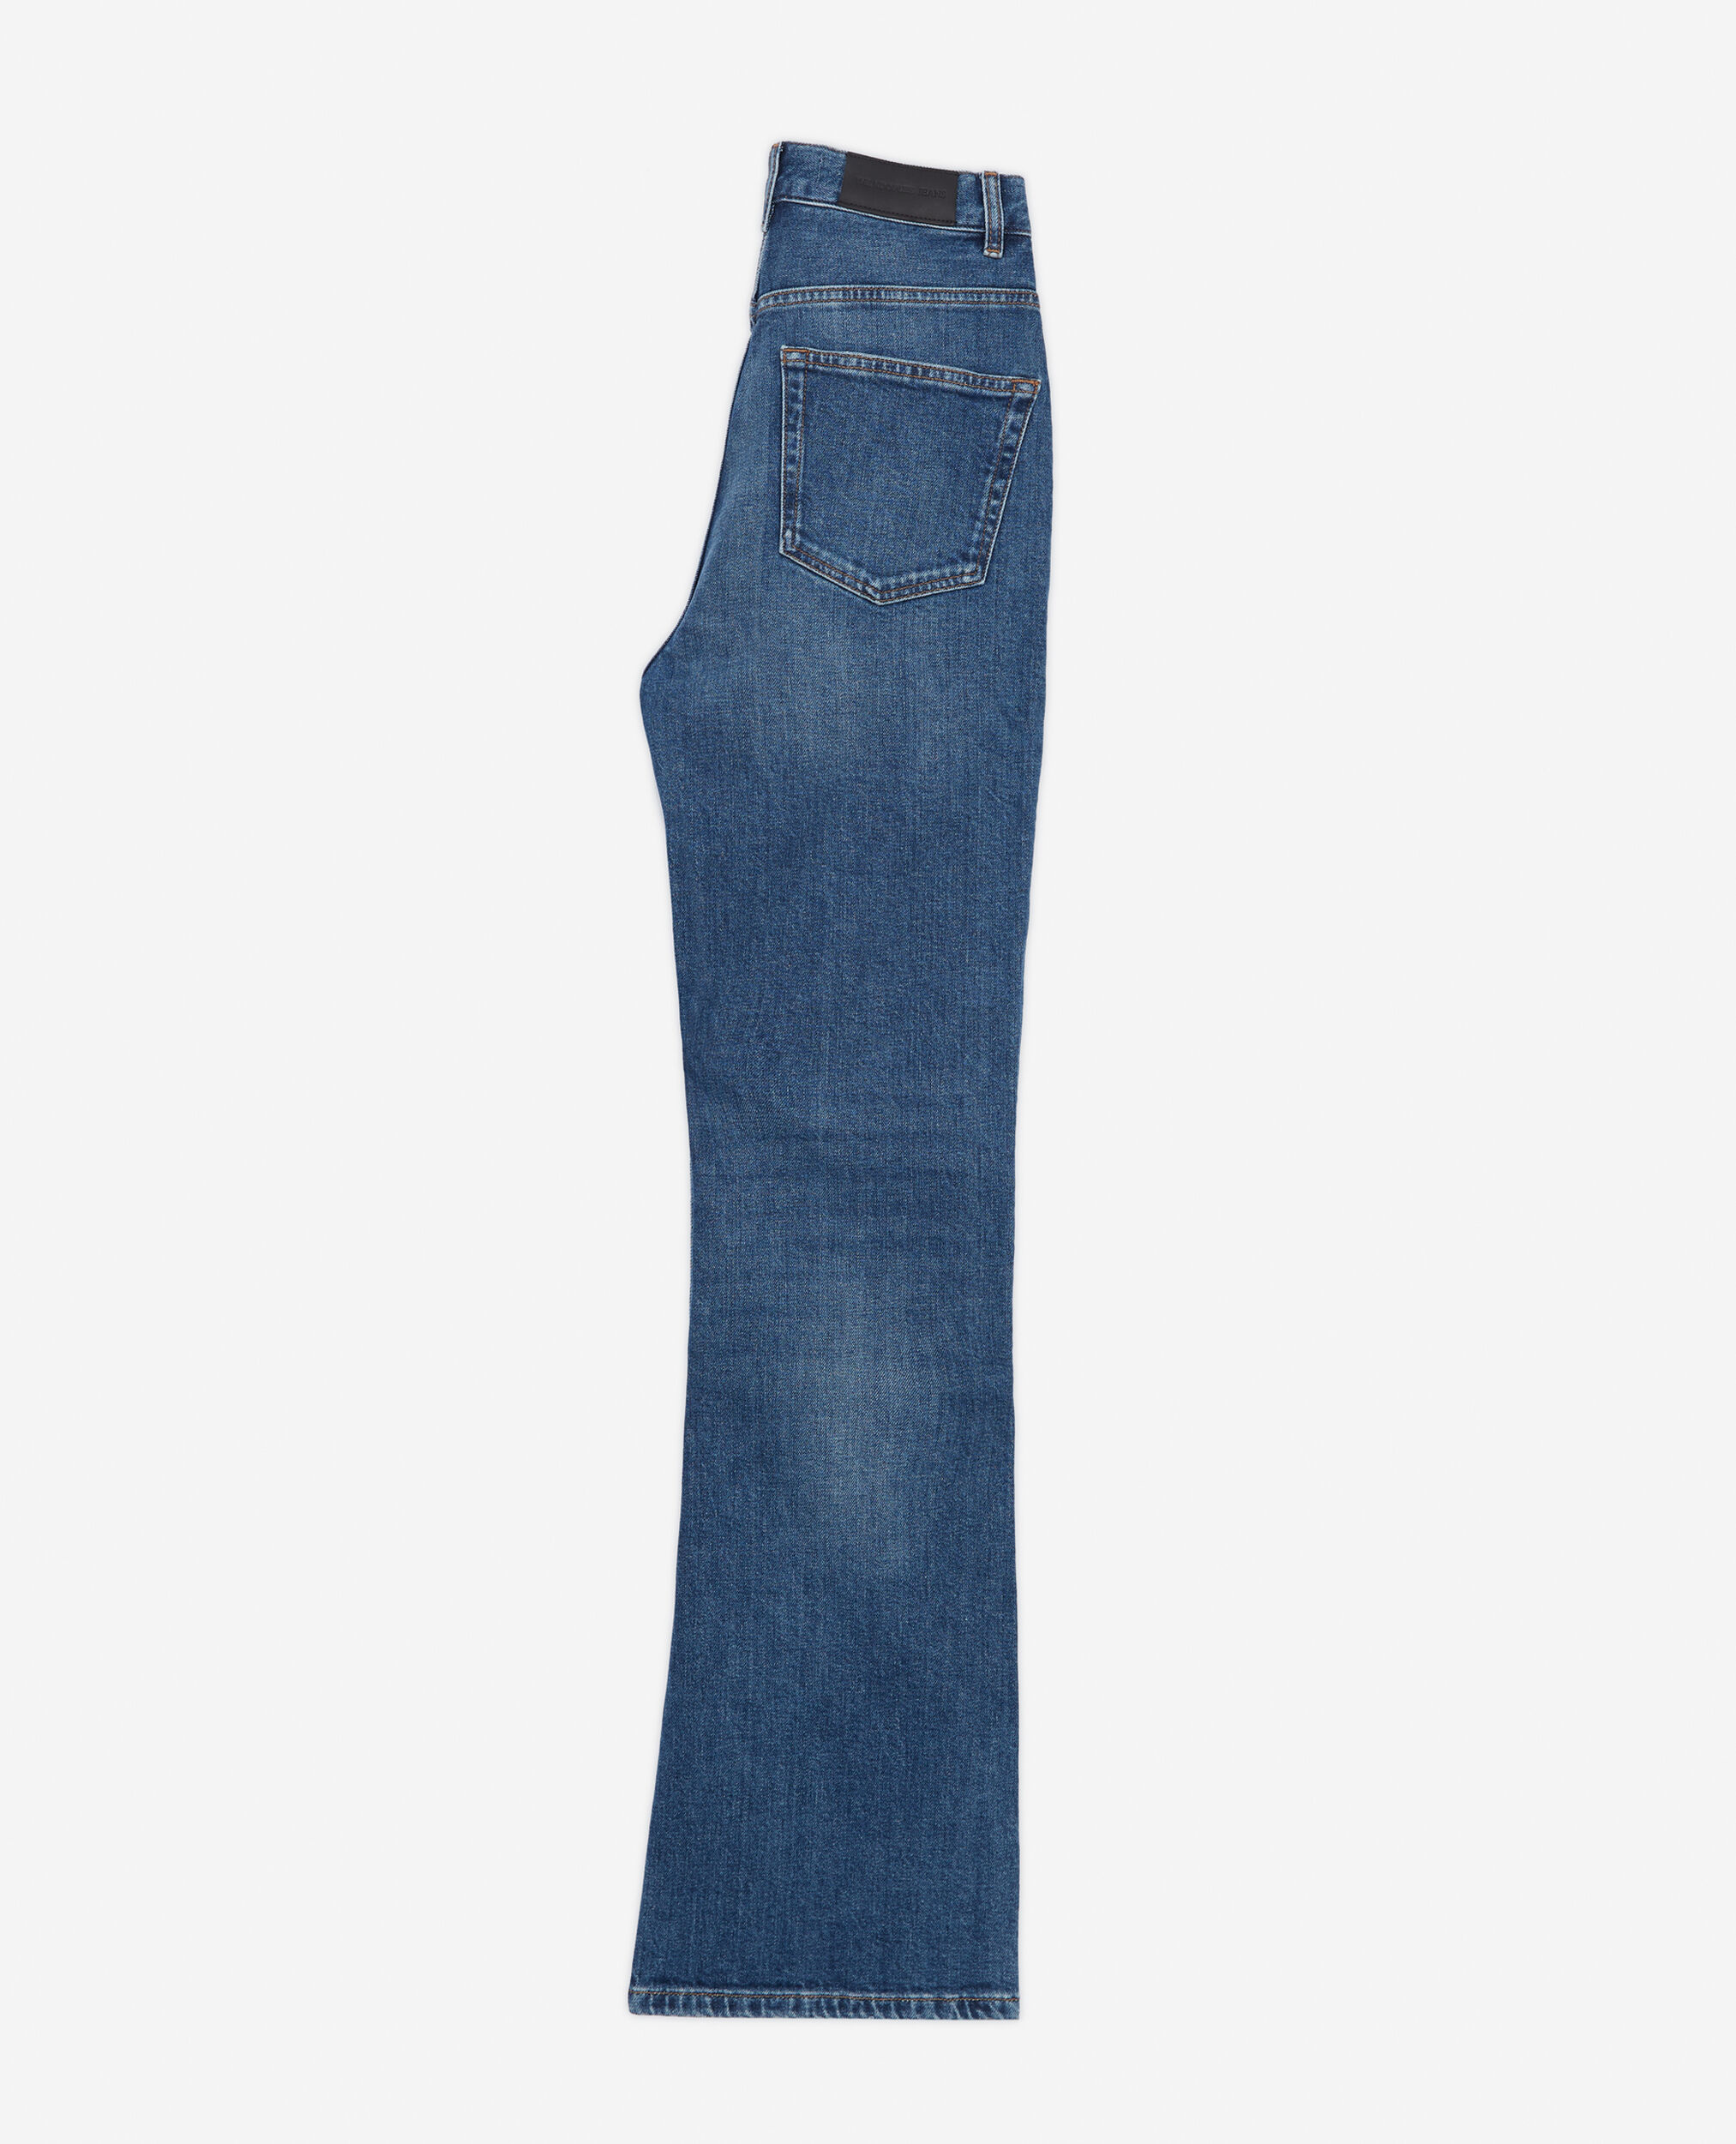 Jeans blau hohe Taille Bootcut, BLUE DENIM, hi-res image number null